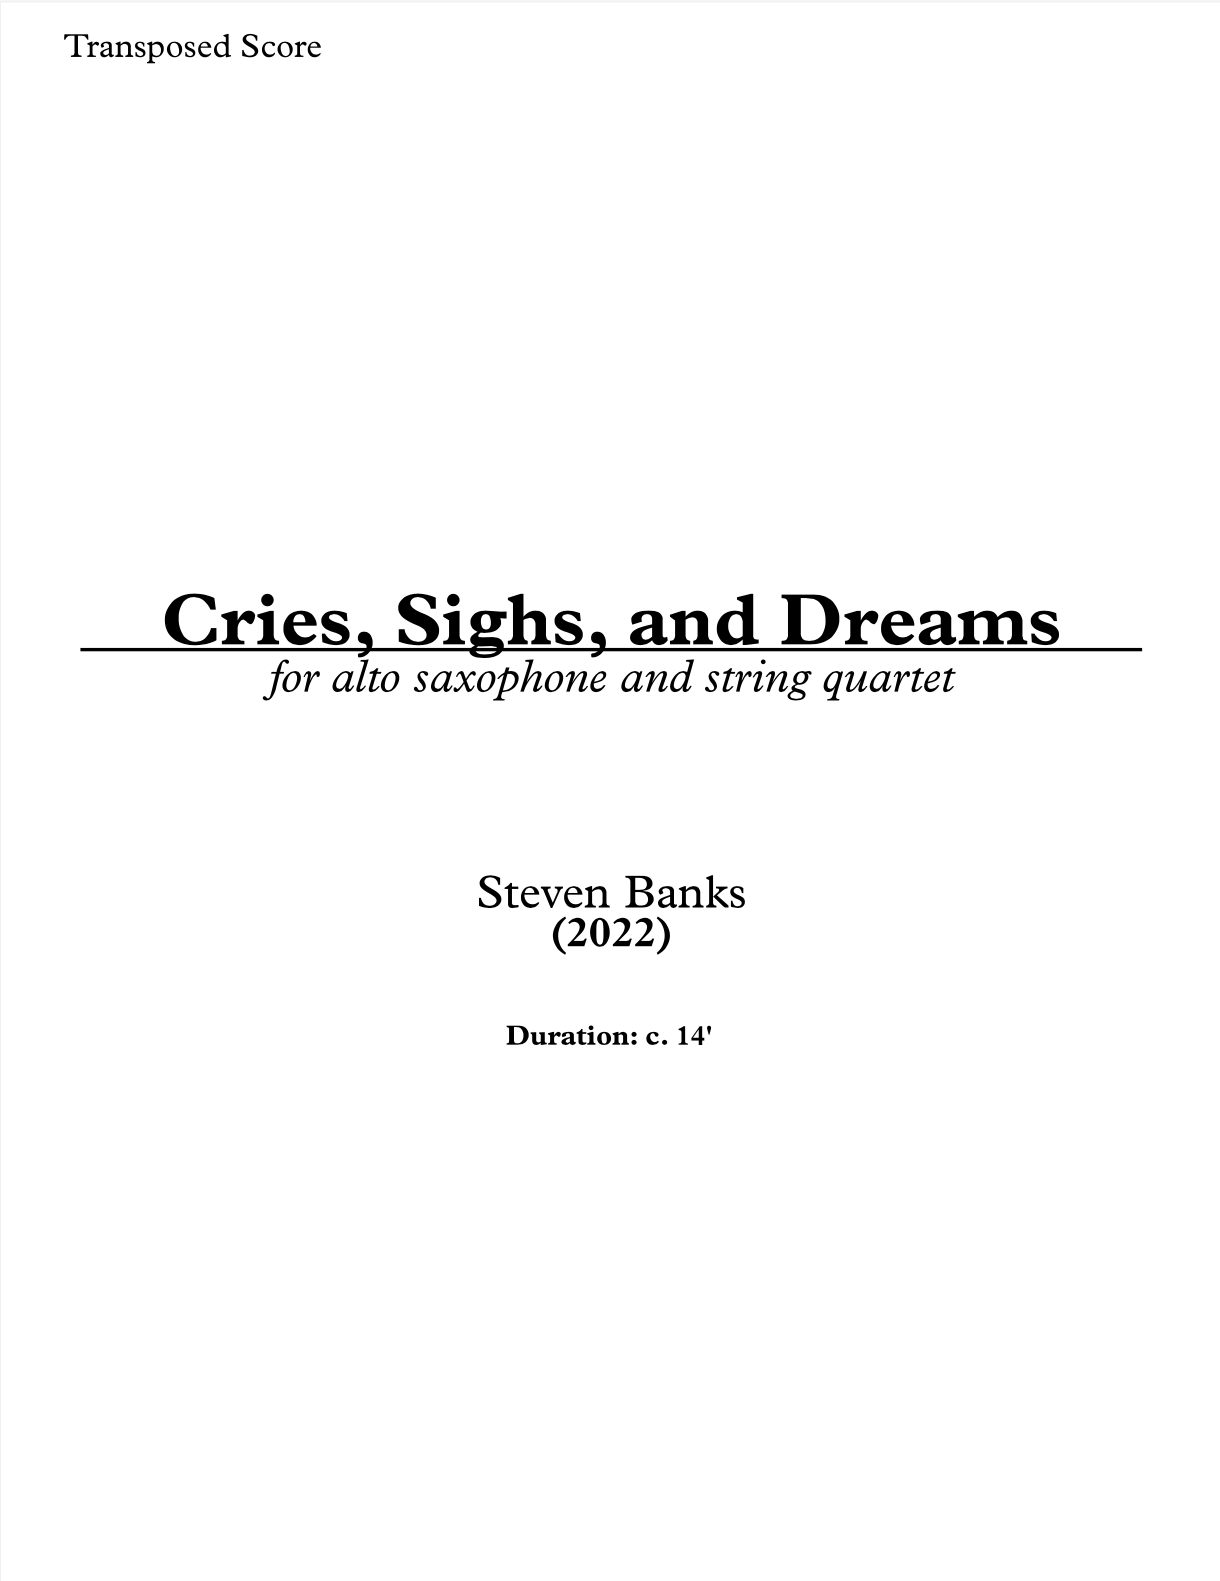 Cries, Sighs, And Dreams (PDF Version) by Steven Banks